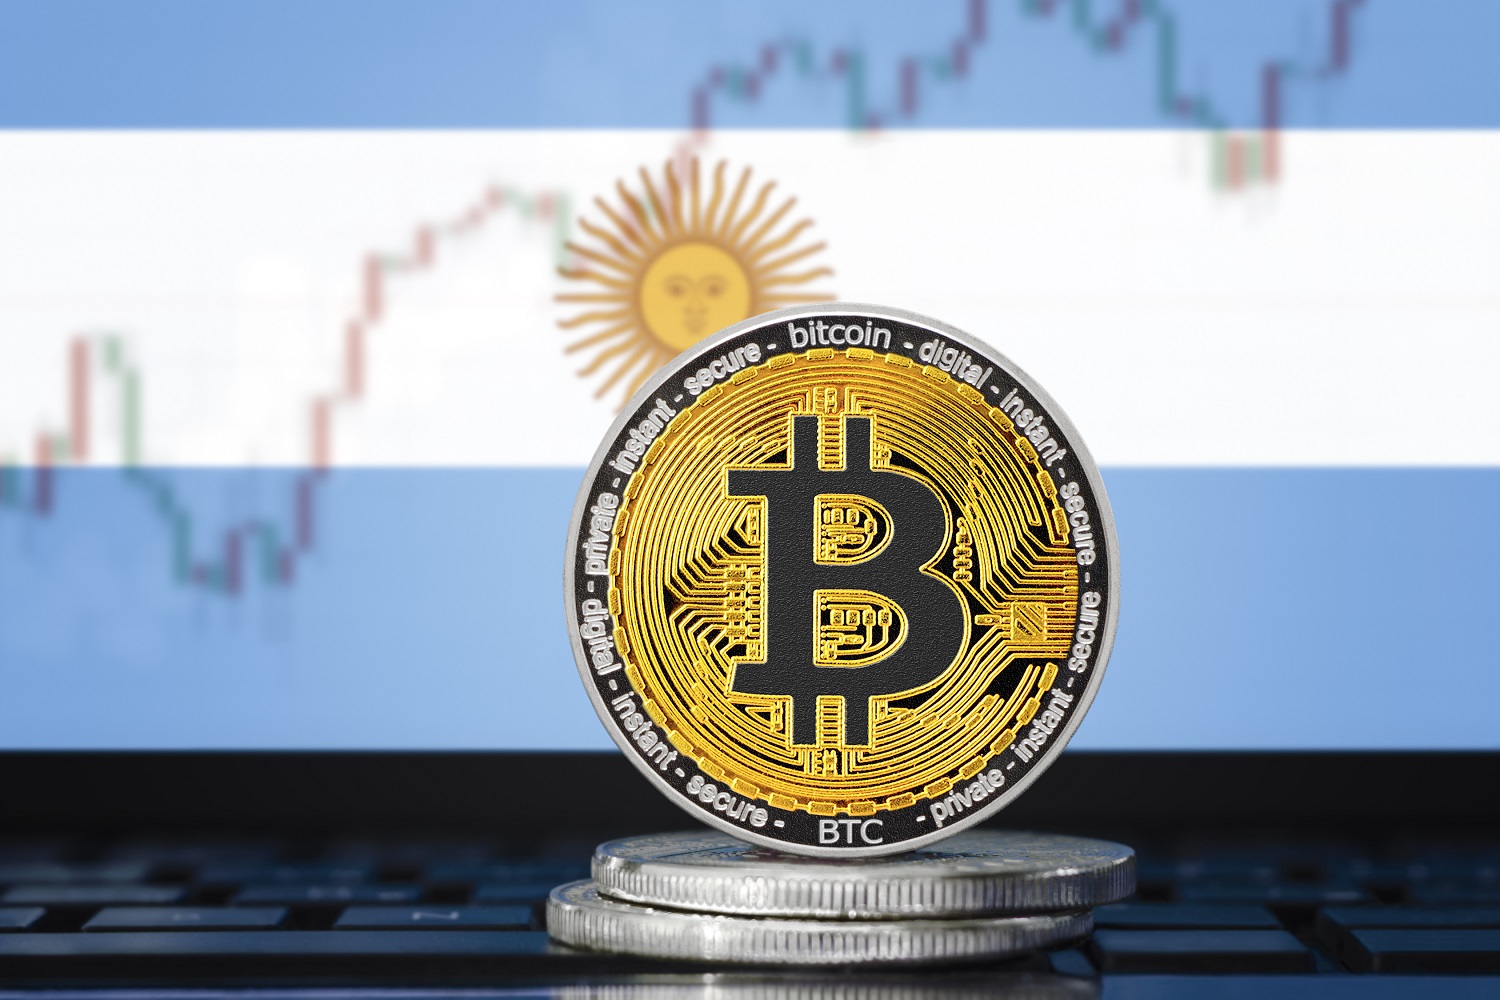 Metal tokens representing Bitcoin against the background of the flag of Argentina and a price chart.